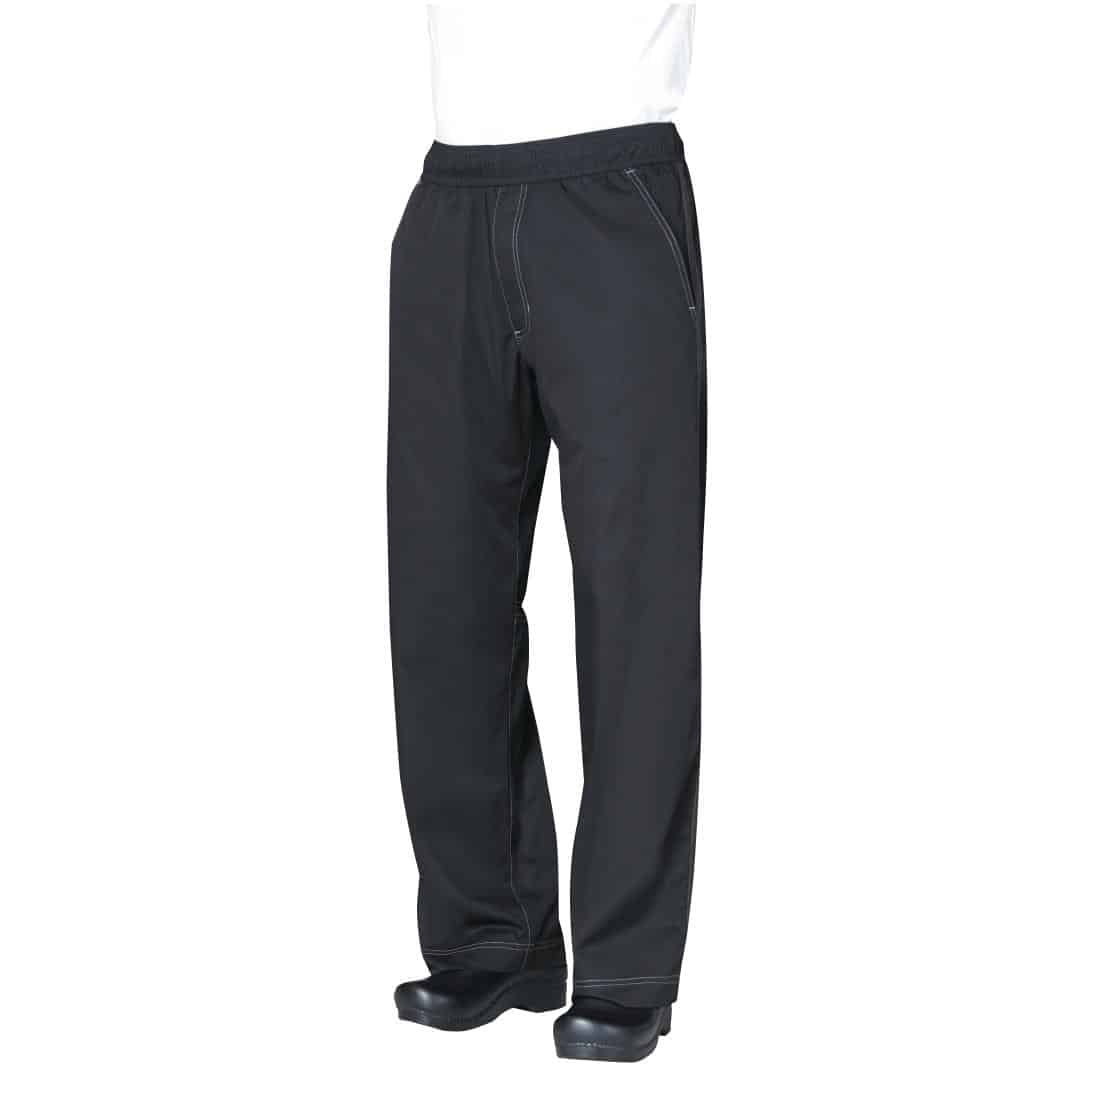 Premier Essential Chefs Trousers - Chefs Trousers - Catering Clothing -  Uniforms - Best Workwear